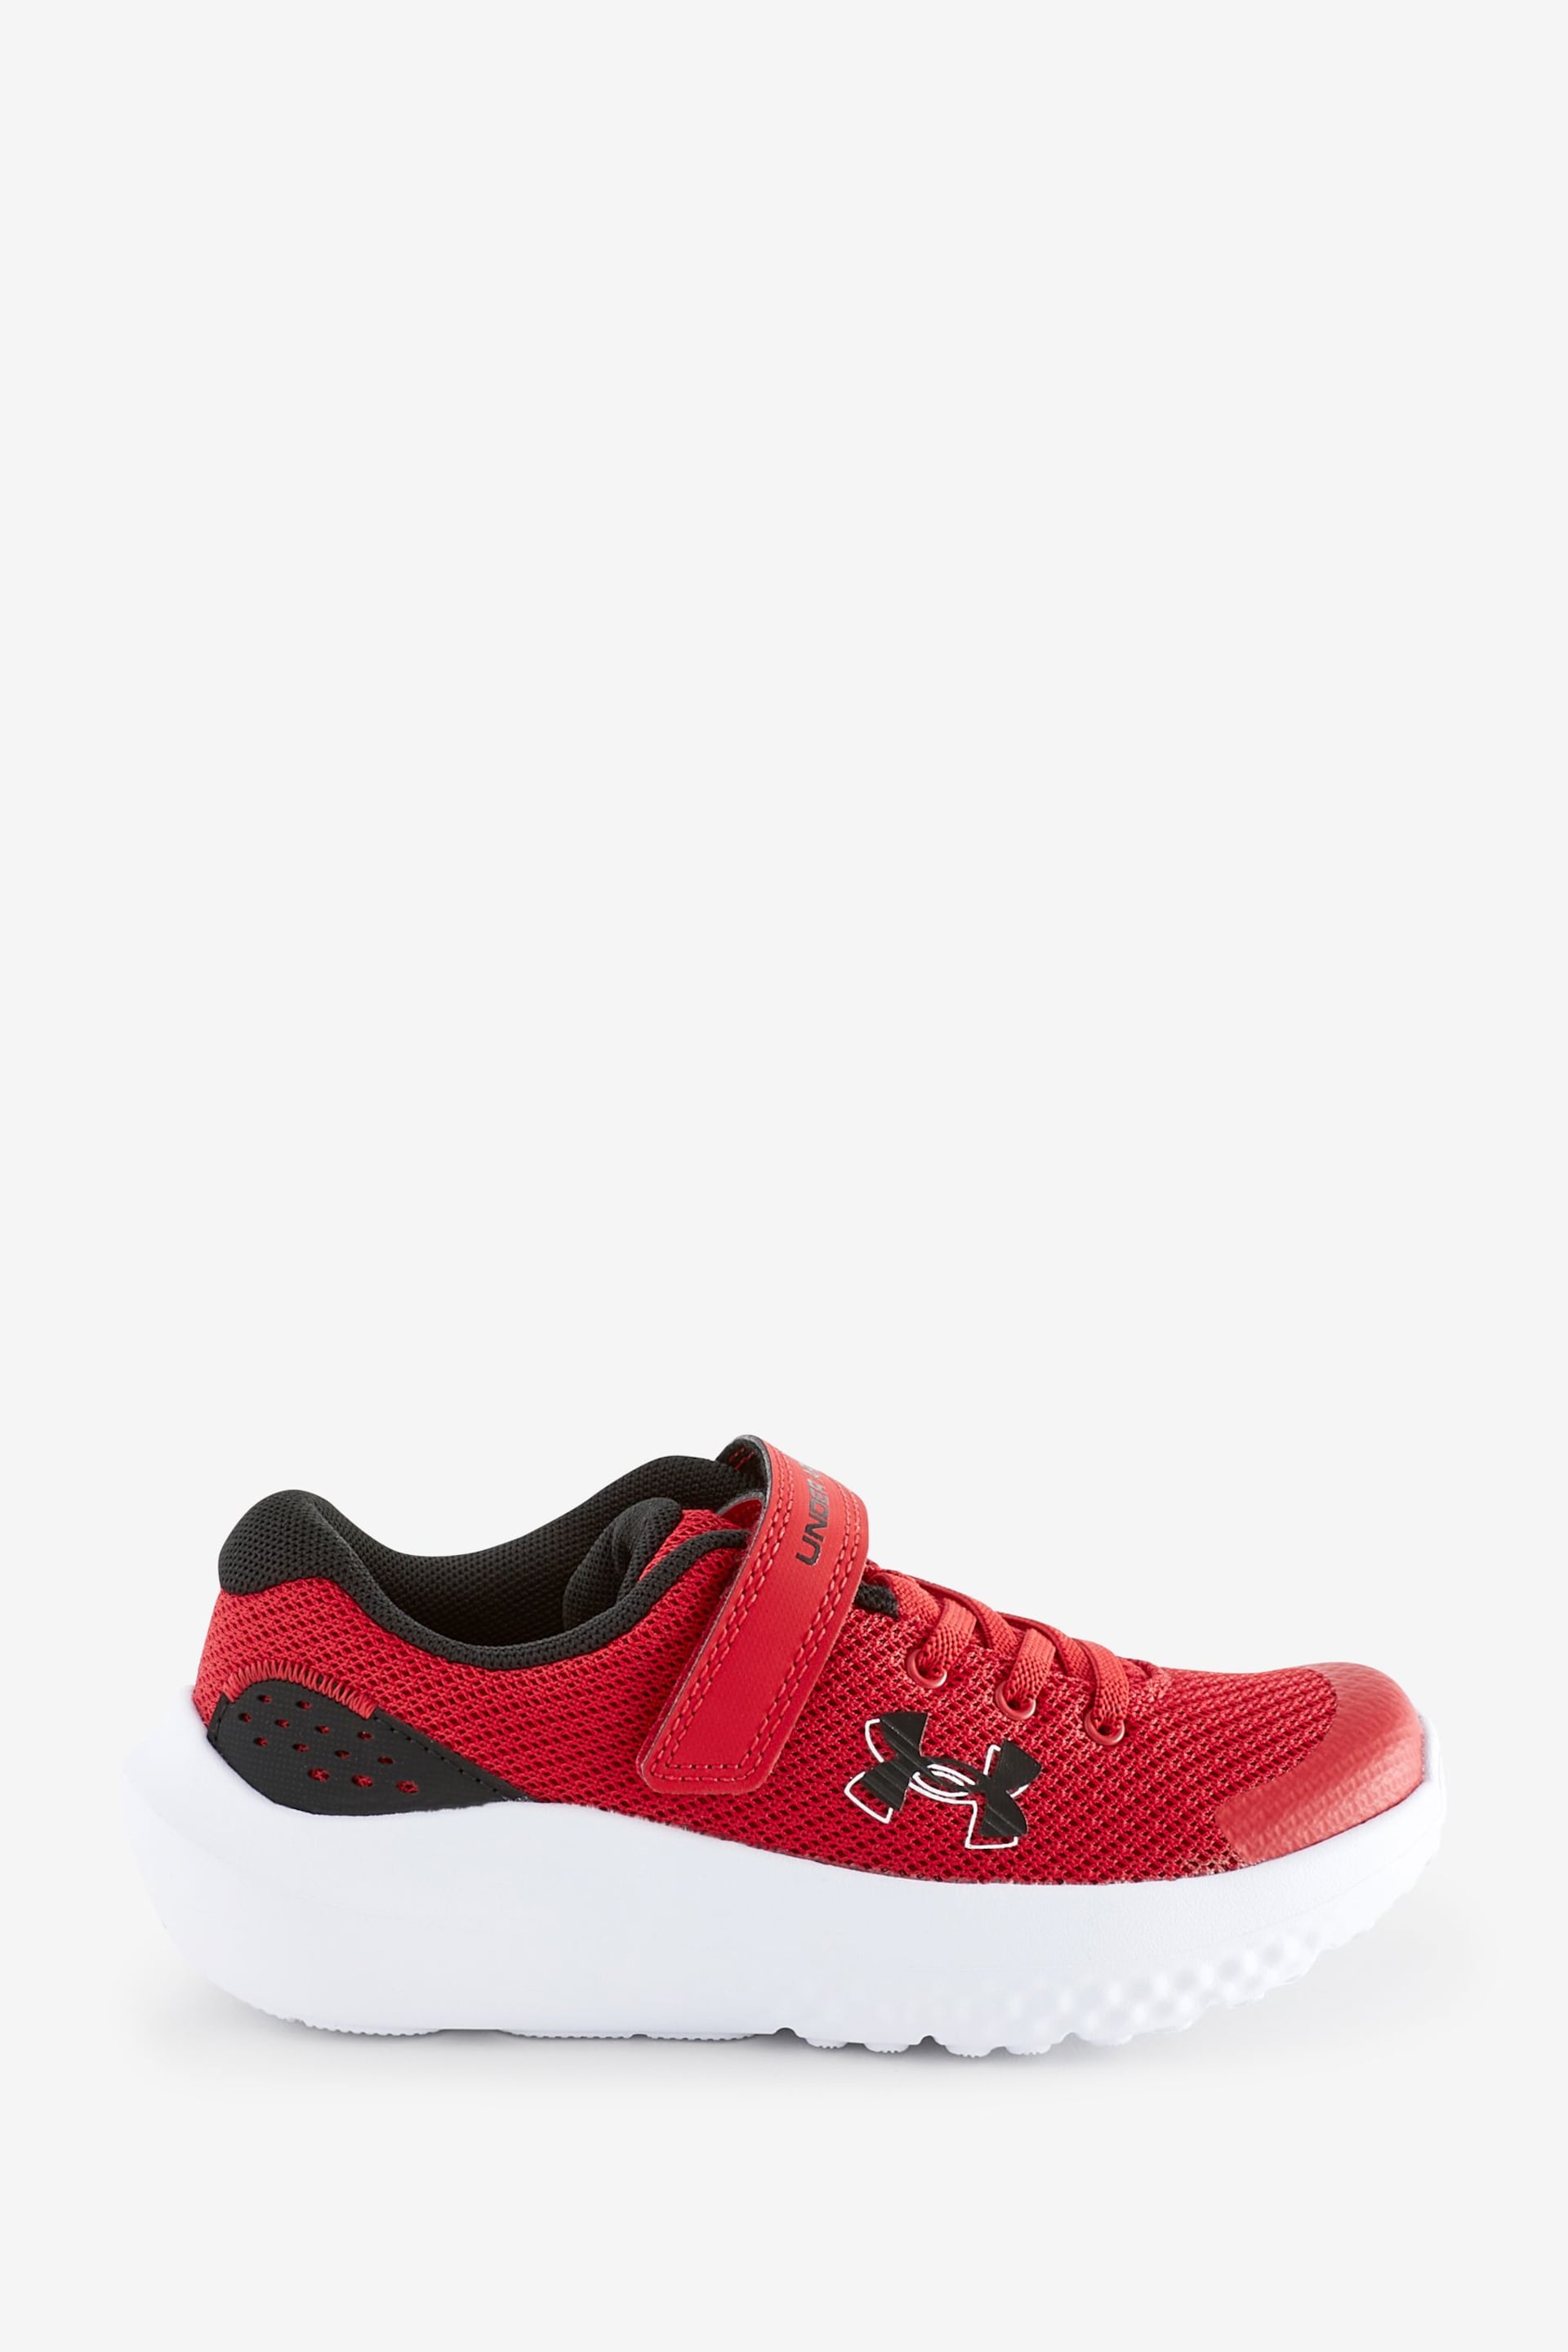 Under Armour Red Surge 4 Trainers - Image 1 of 7